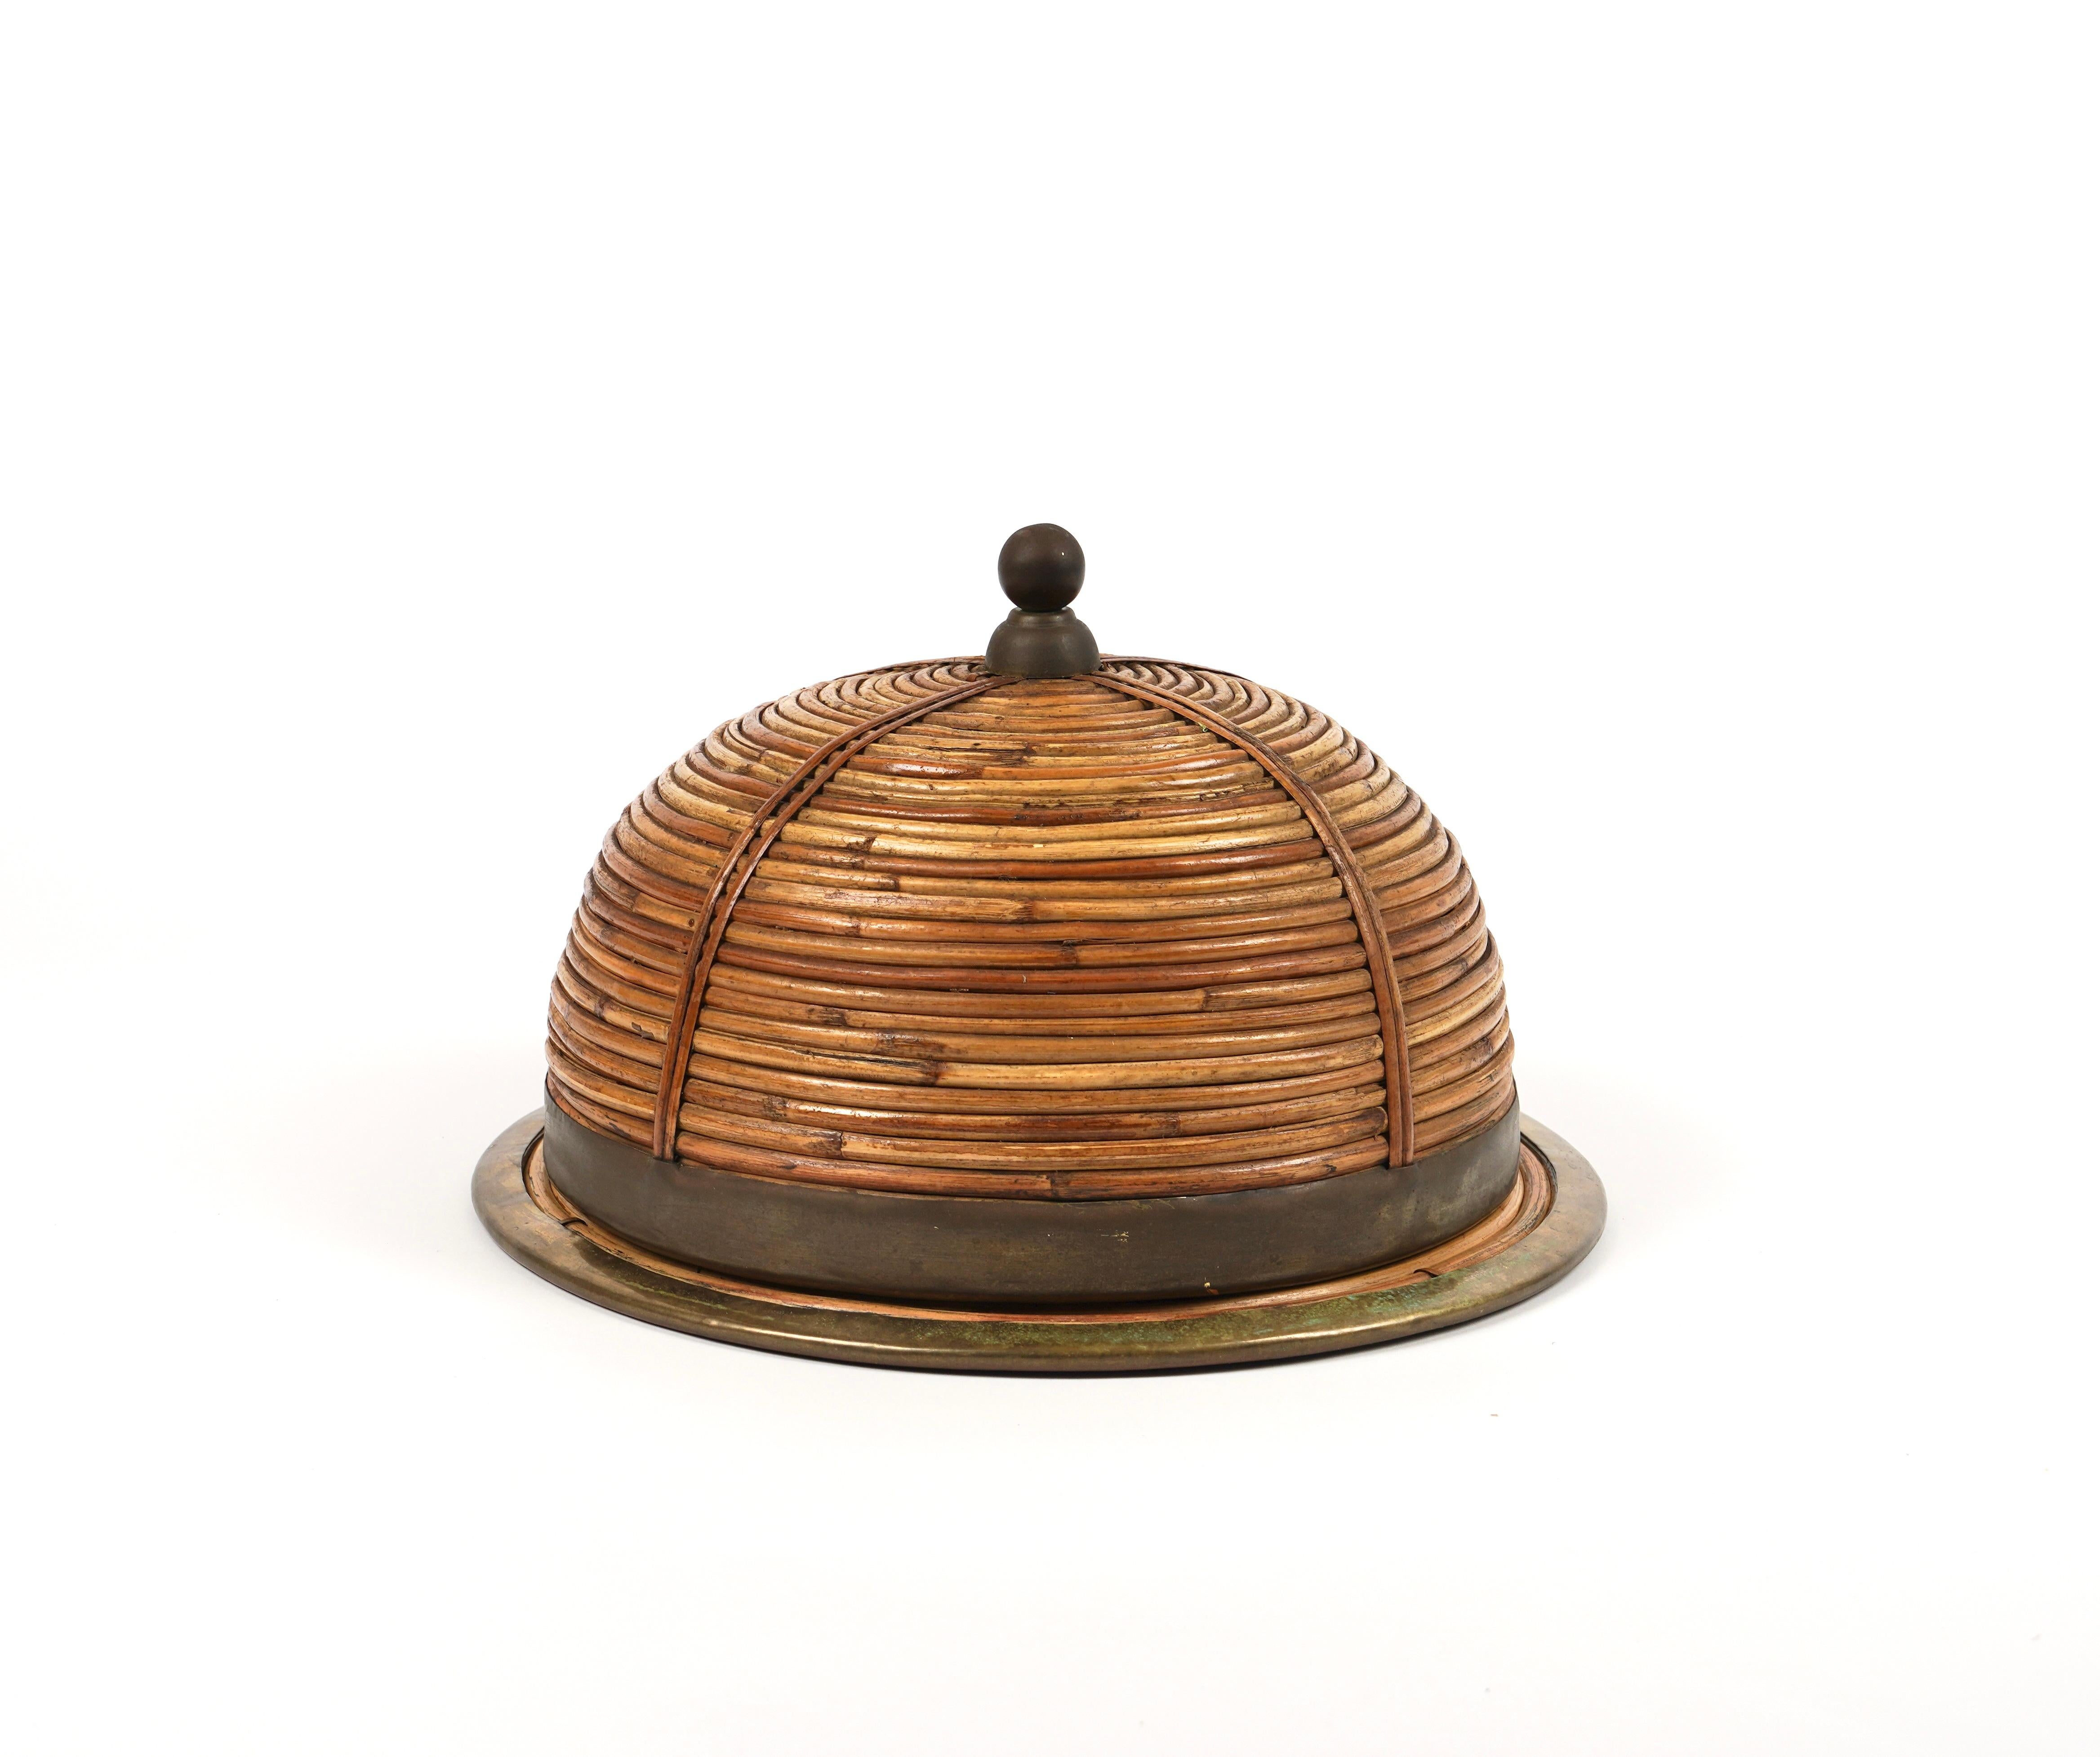 Gorgeous serving tray cloche plate in rattan and bamboo with brass details probably by the Italian Gabriella Crespi.

Made of rattan and bamboo, this charming piece is in the typical style where the organic beauty of the woven materials is